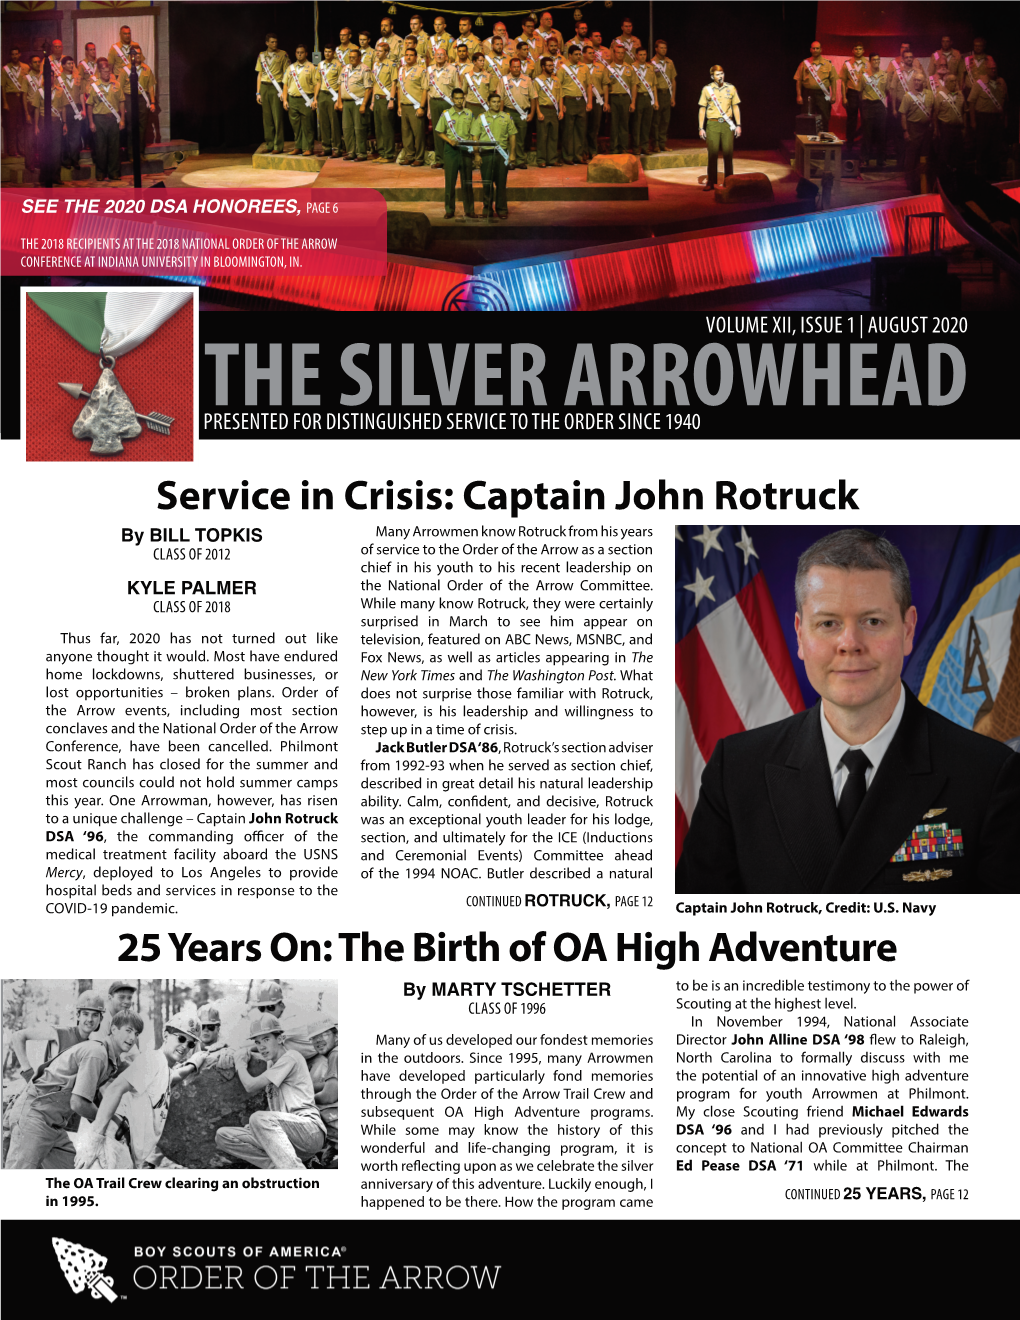 The Silver Arrowhead Presented for Distinguished Service to the Order Since 1940